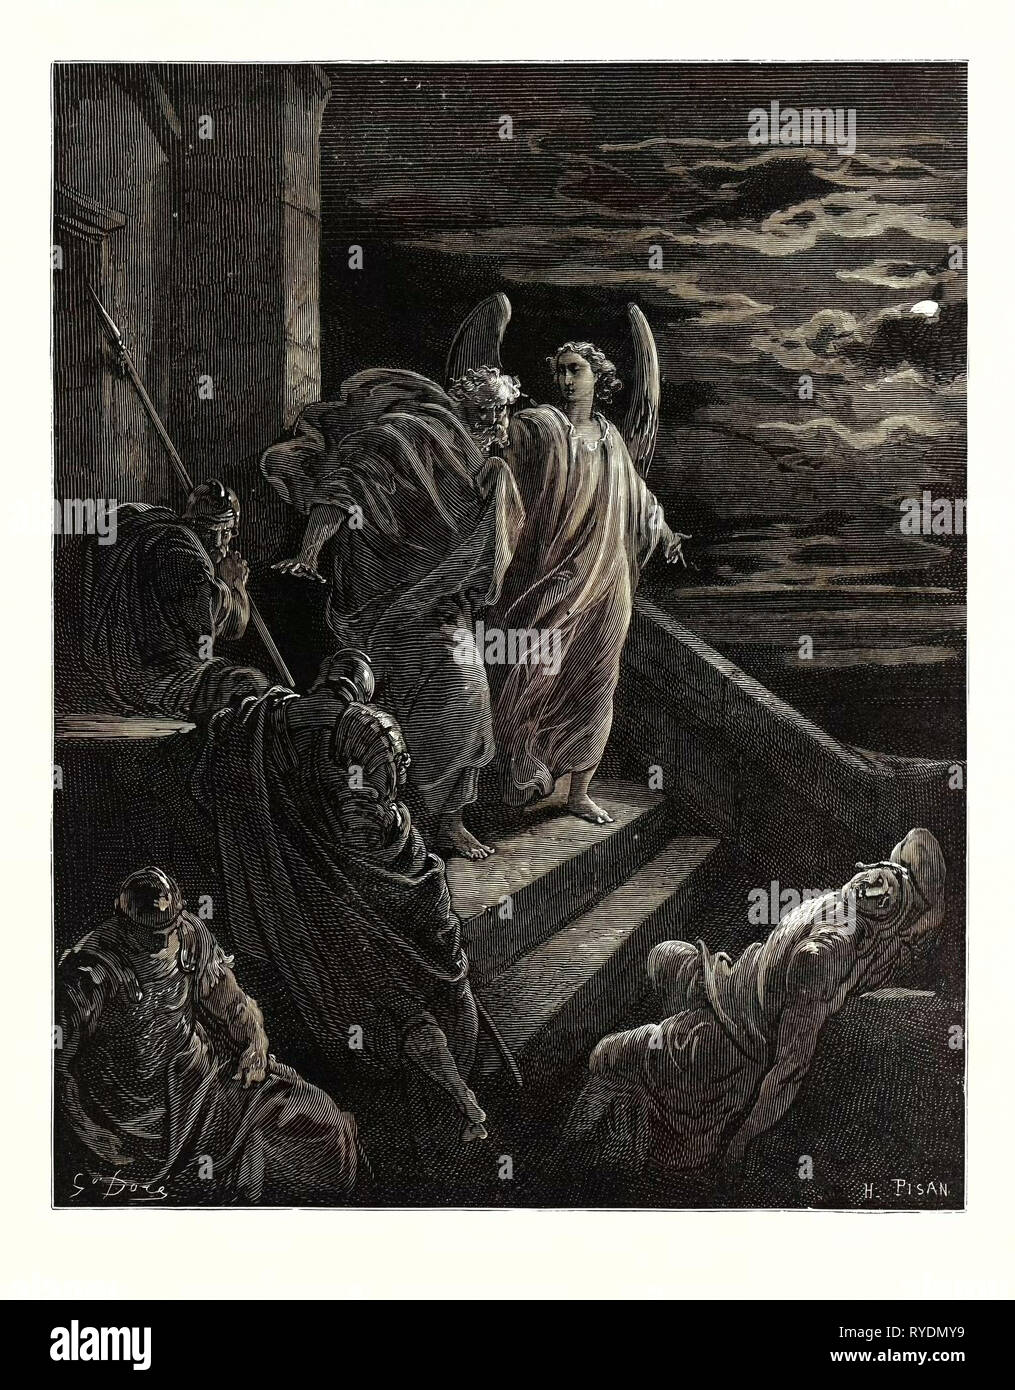 Saint Peter Delivered from Prison, by Gustave Doré, 1832 - 1883, French. Engraving for the Bible. 1870, Art, Artist, Holy Book, Religion, Religious, Christianity, Christian, Romanticism, Colour, Color Engraving Stock Photo